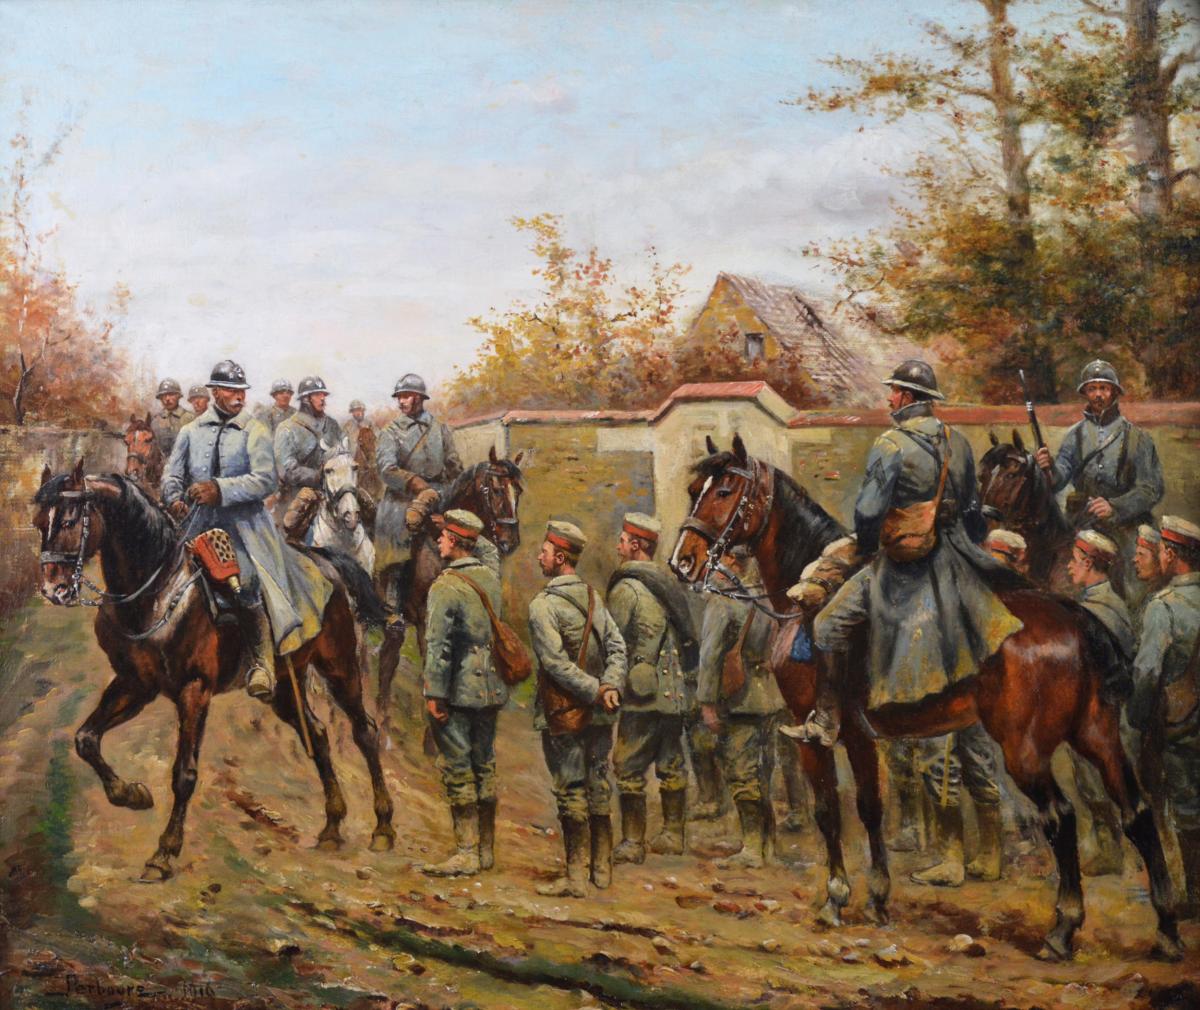 Military WW1 oil painting of French and German Soldiers by Paul-Emile Perboyre